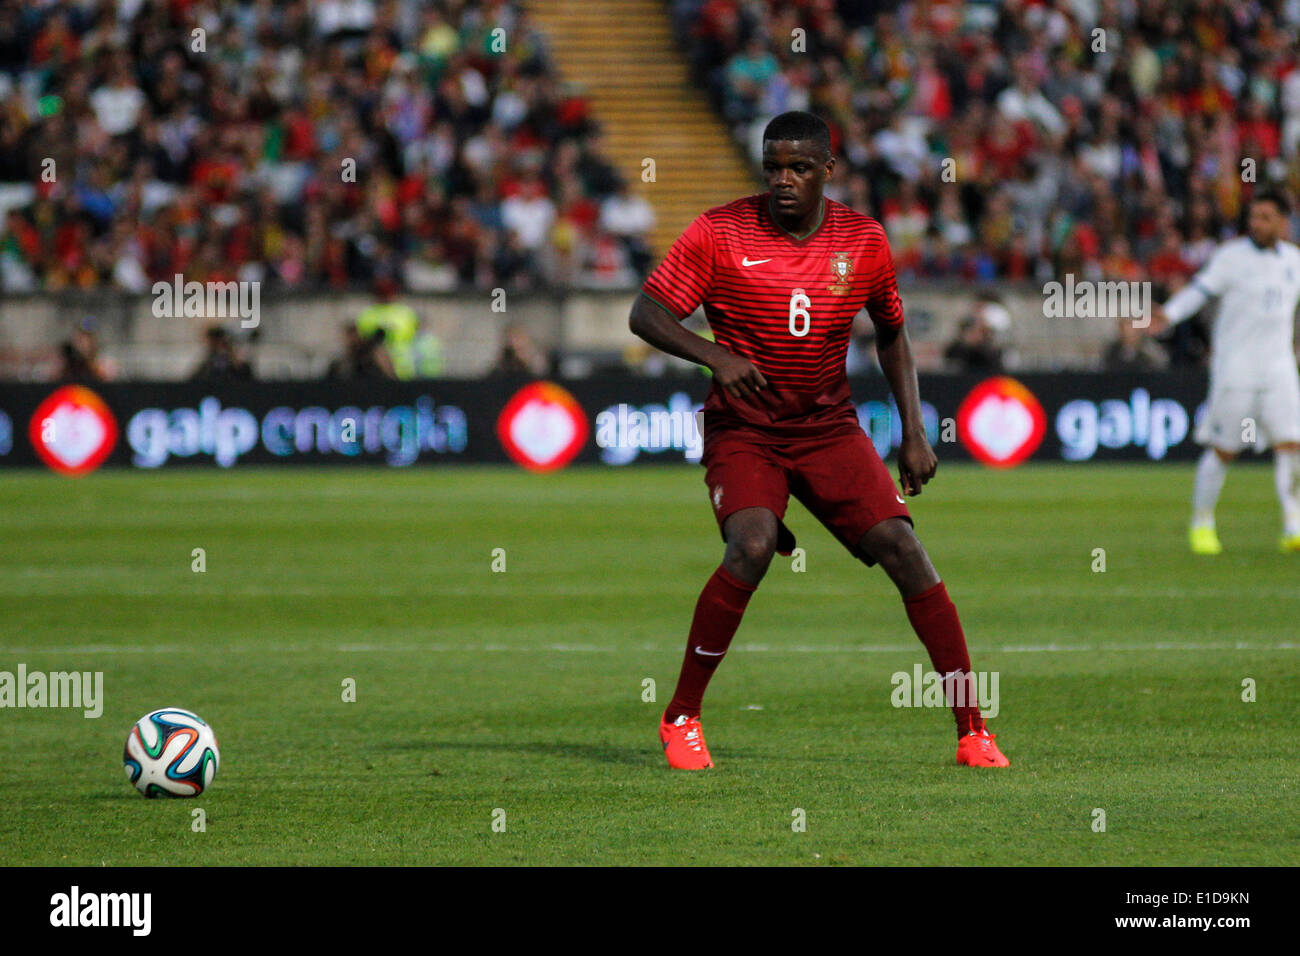 Lisbon, Porrtugal. 31st May, 2014. Portugal midfielder William Carvalho (6) during preparatory friendly match for the World Cup at the National Stadium in Lisbon, Portugal, Saturday, May 31, 2014. Credit:  Leonardo Mota/Alamy Live News Stock Photo